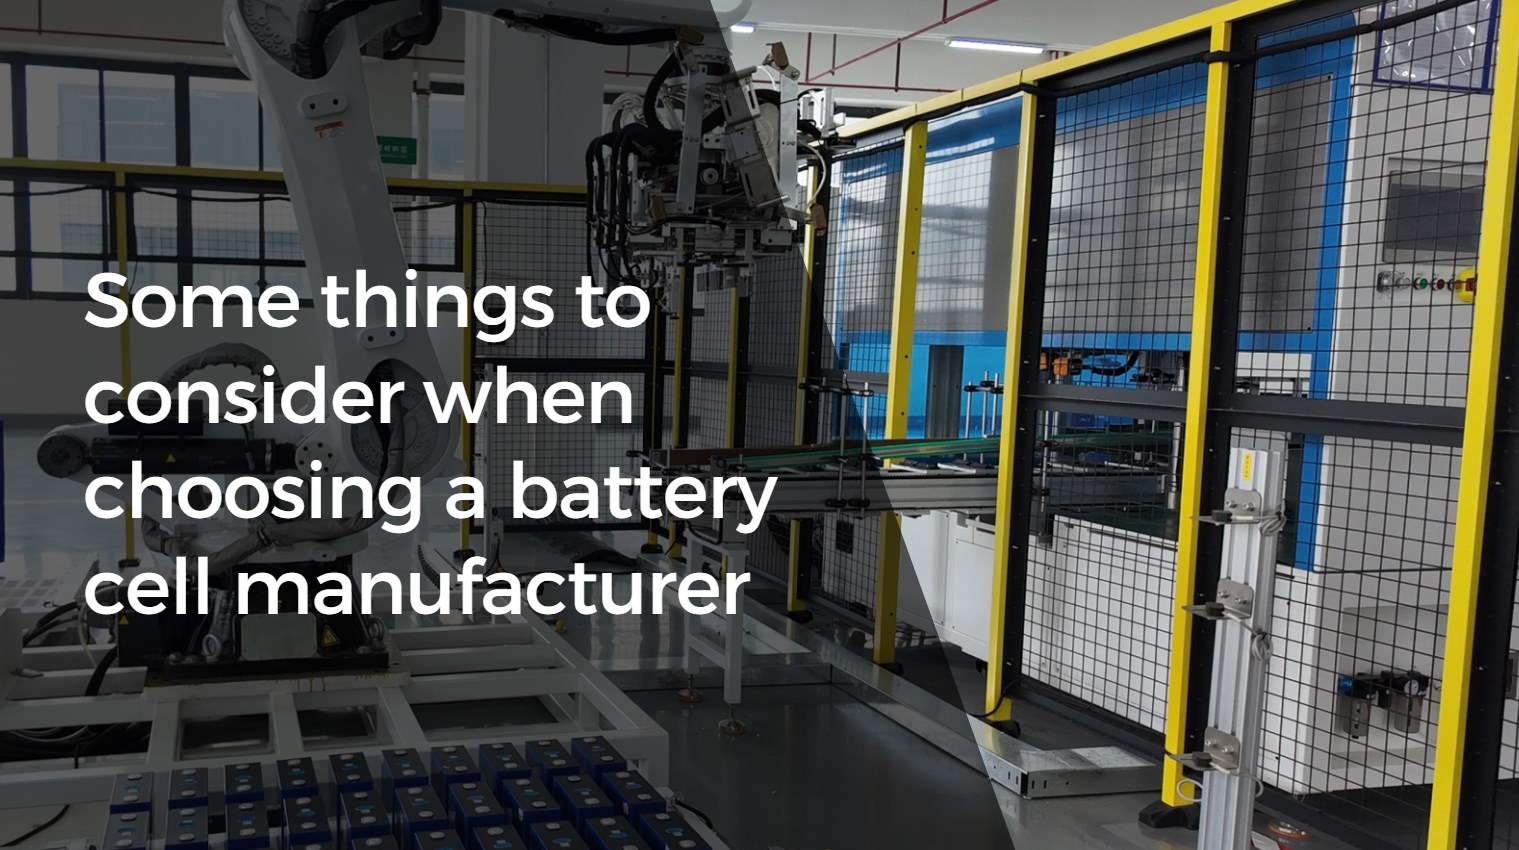 Some things to consider when choosing a battery cell manufacturer include quality, price, and delivery time